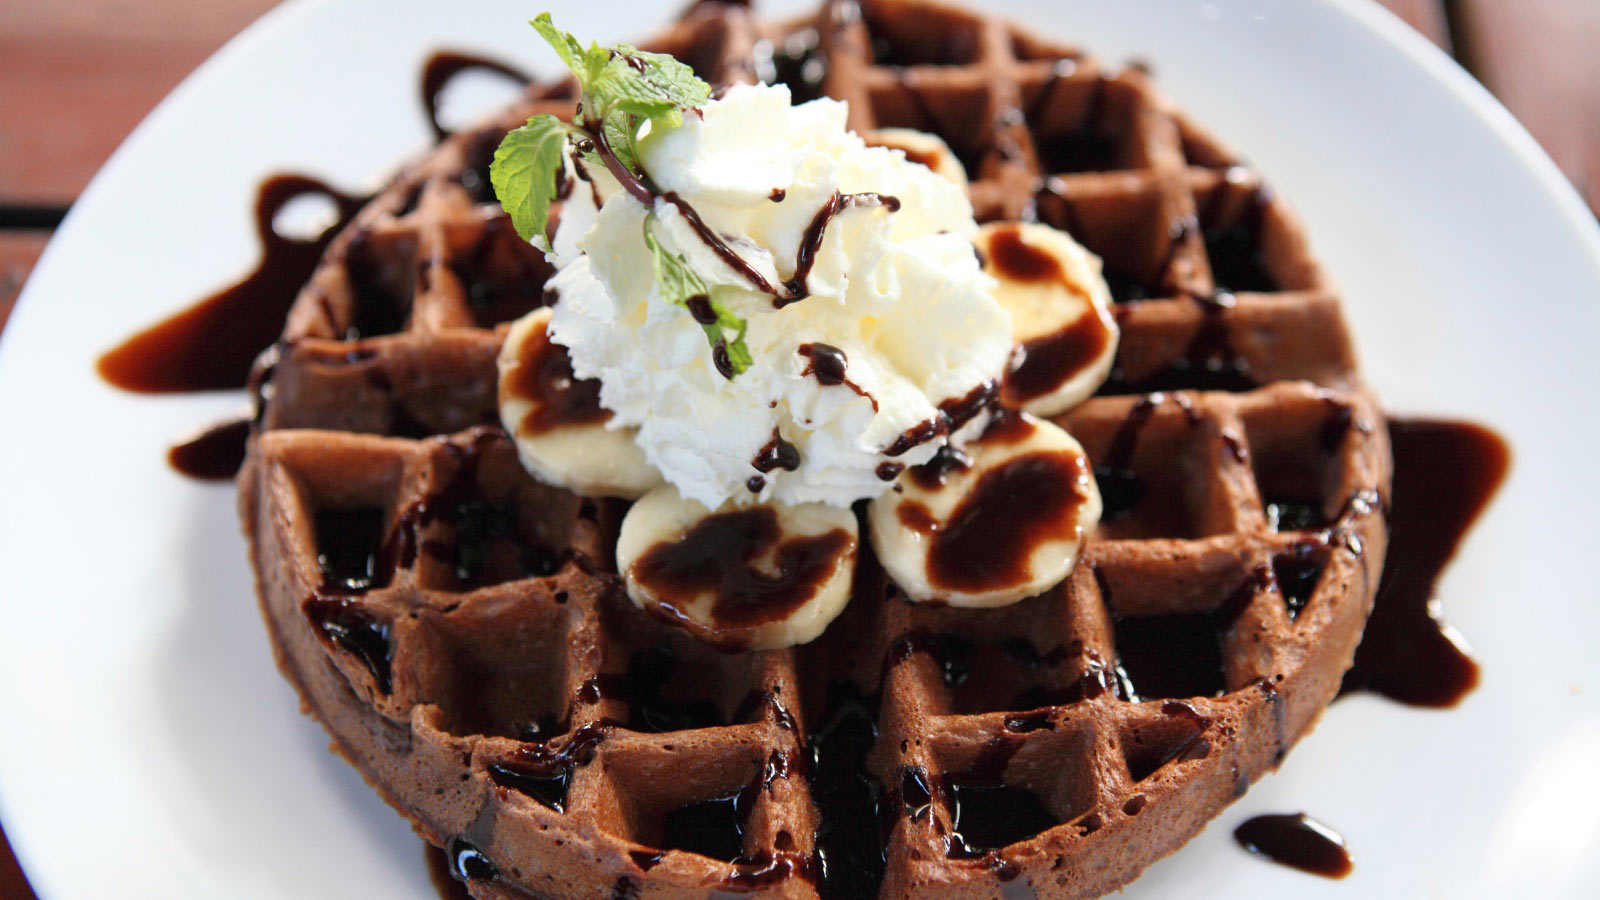 A single chocolate waffle with whipped cream and chocolate drizzle on a white plate.